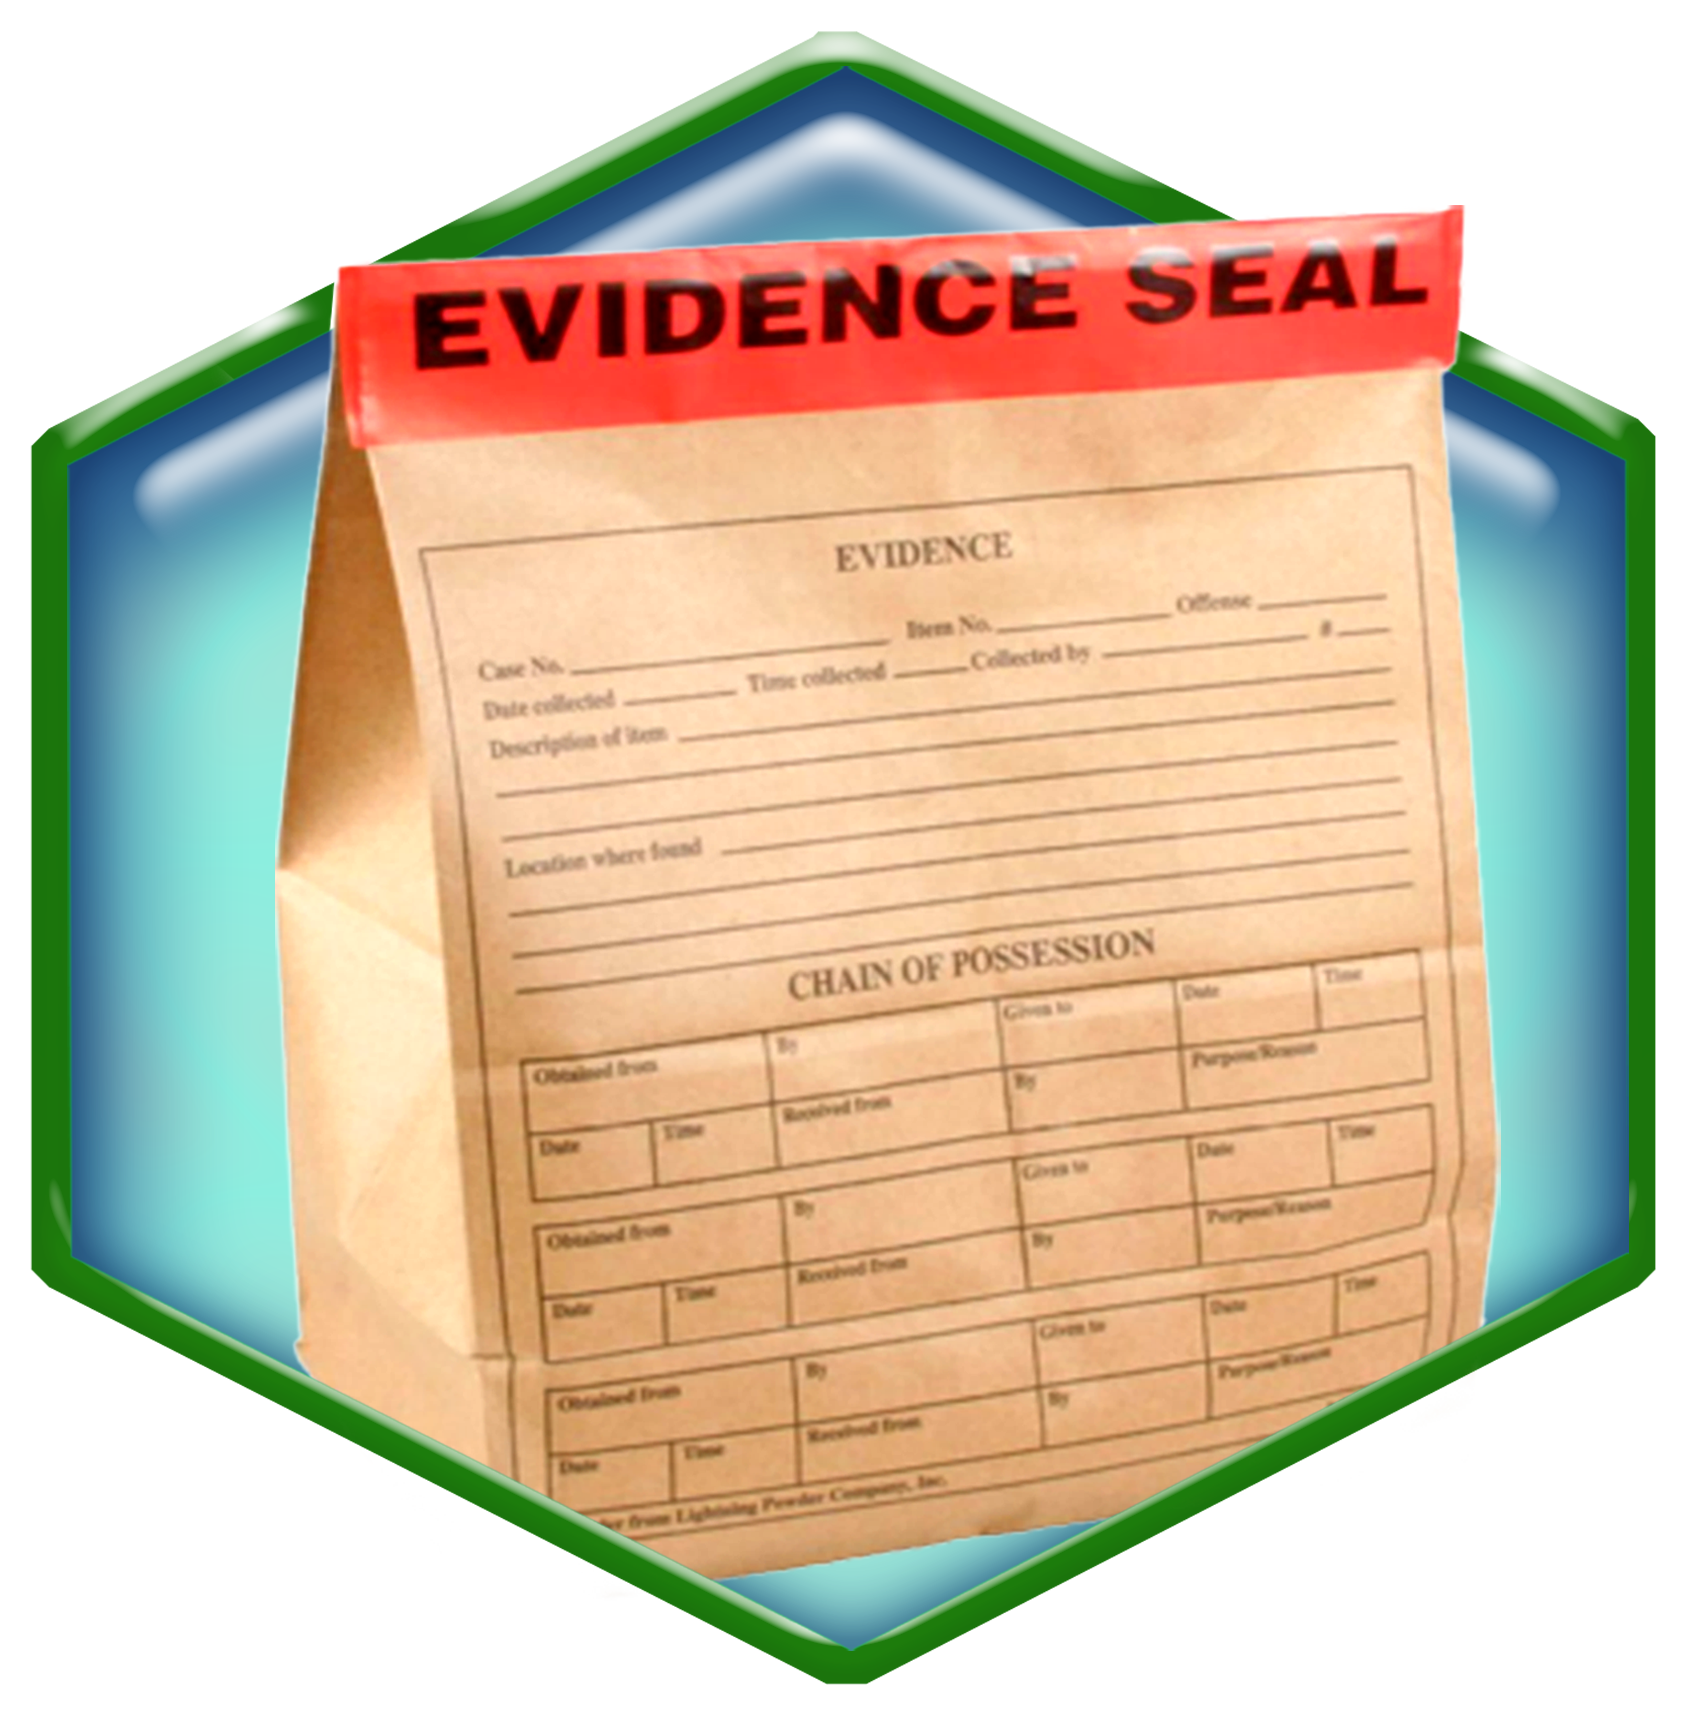 Crime Lab Services - EVIDENCE